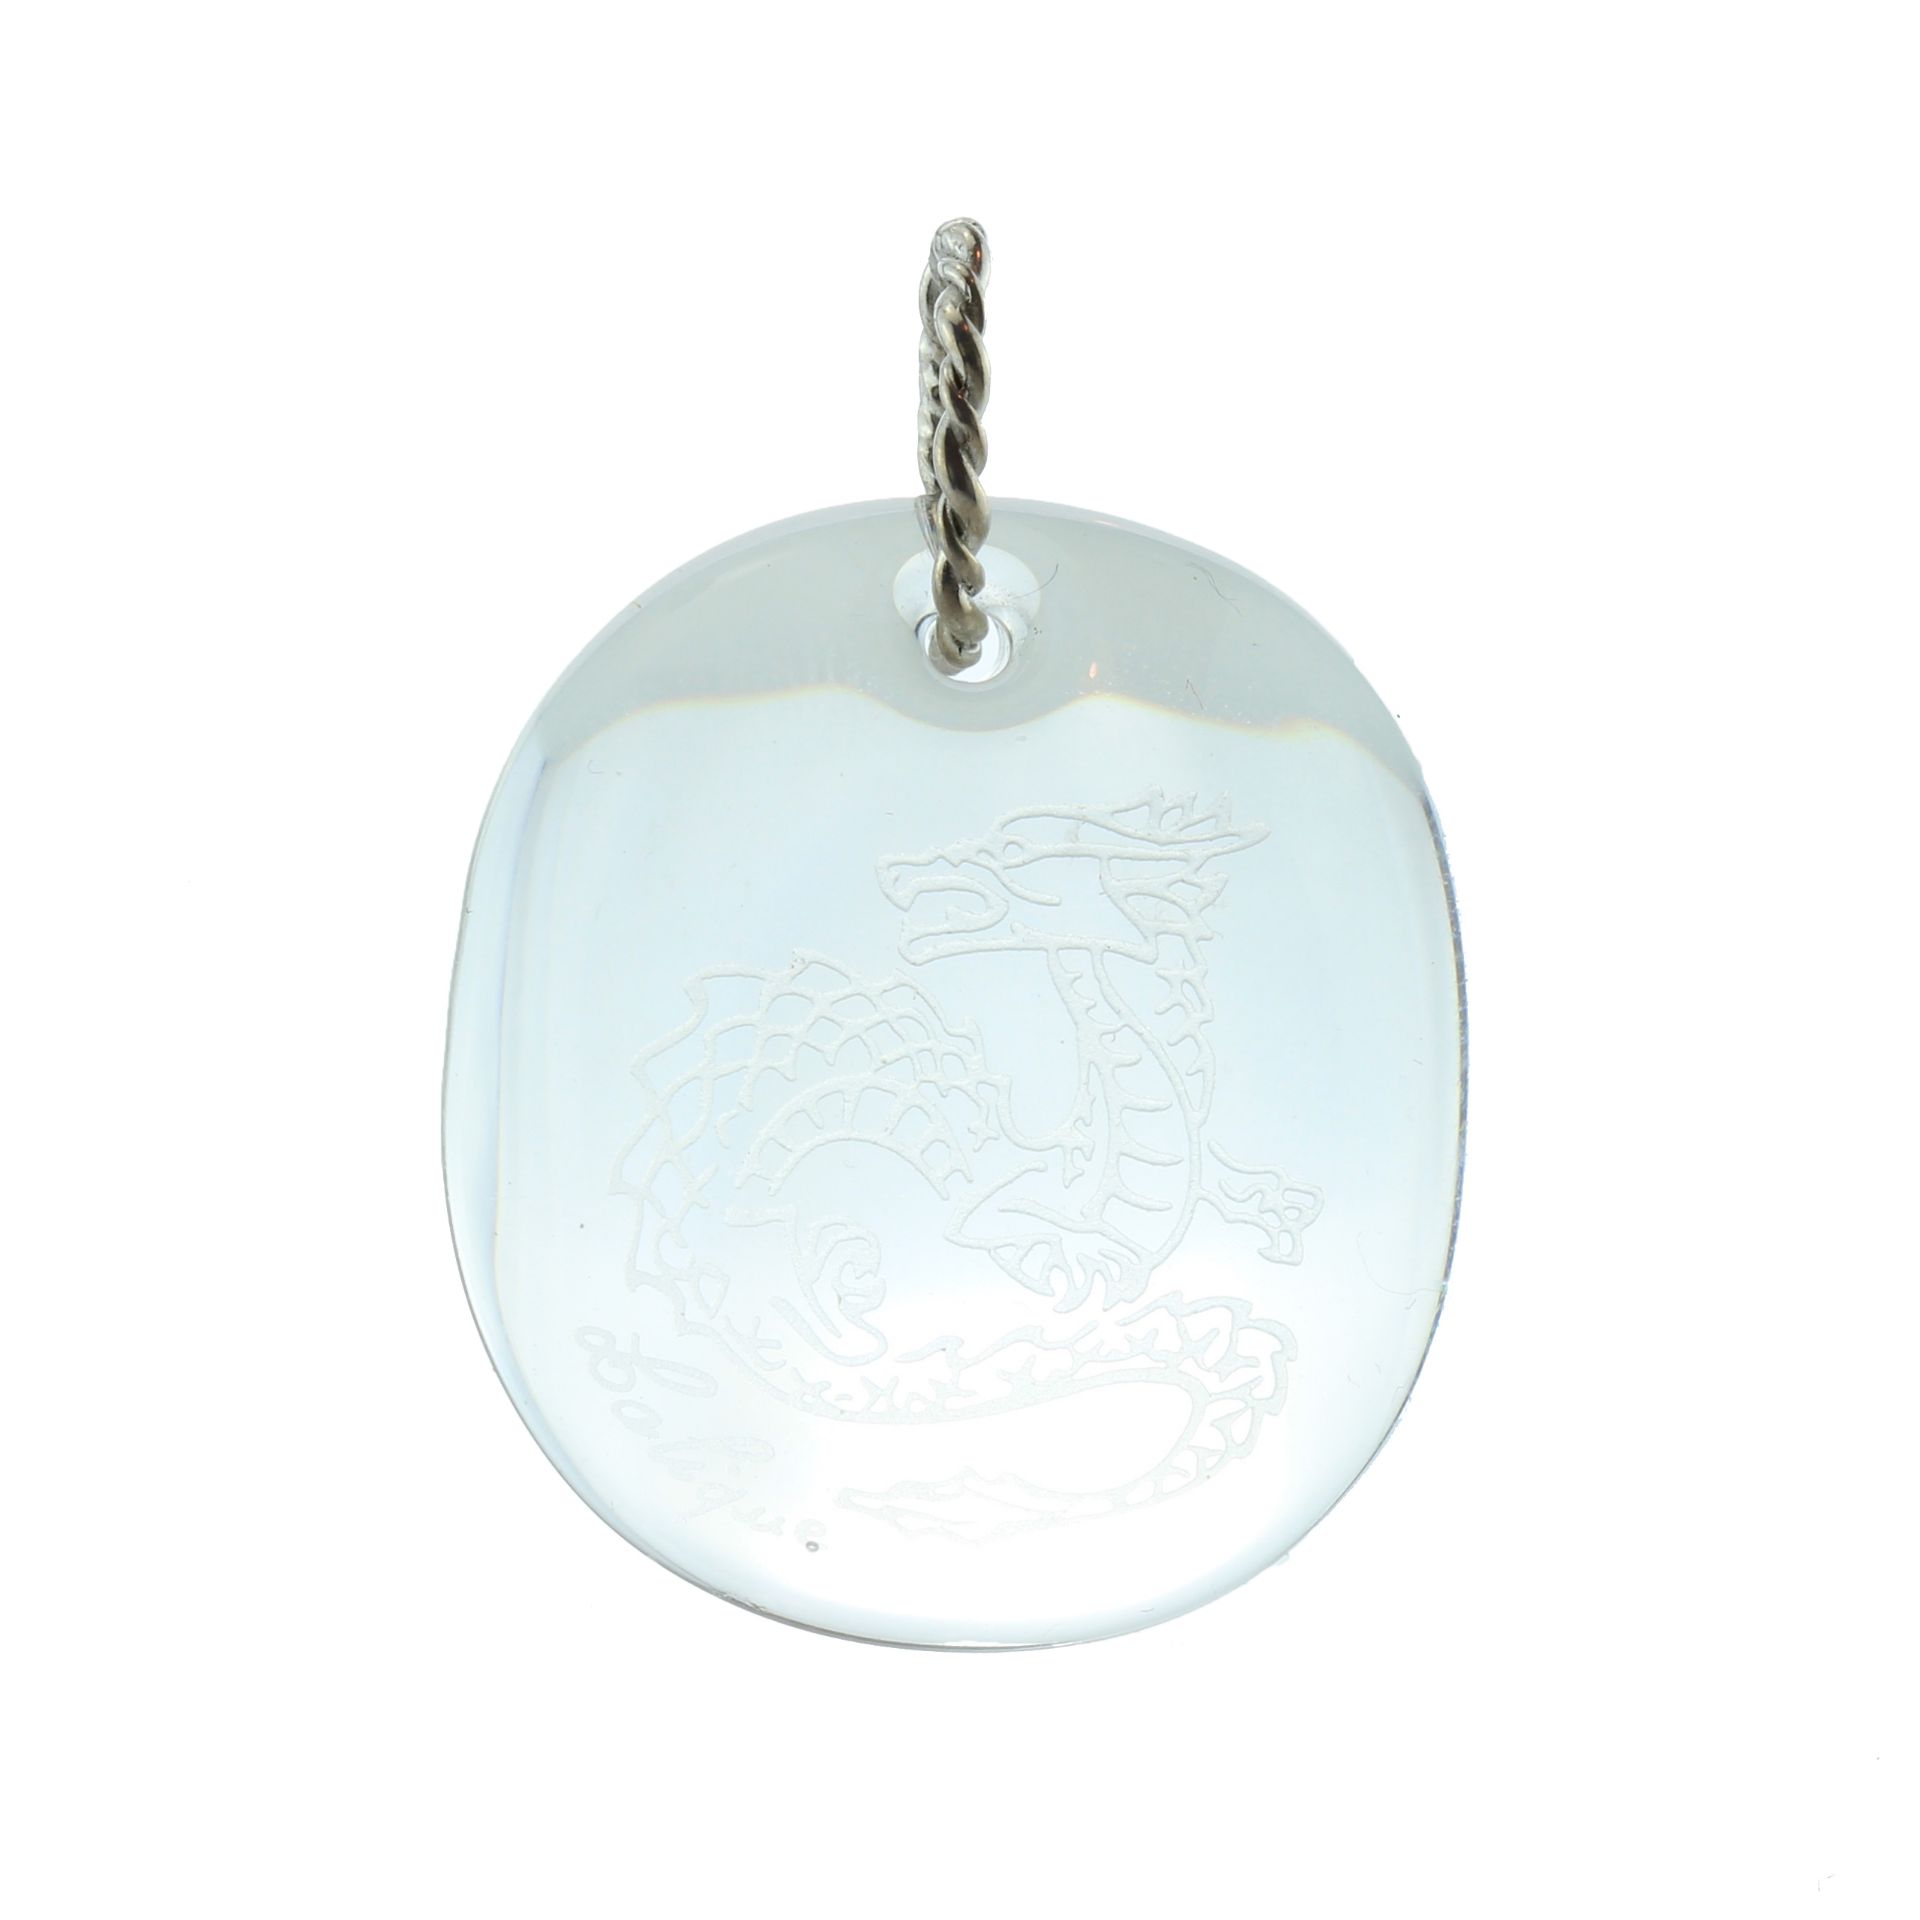 LALIQUE A glass pendant dragon pendant by Lalique France with an etched depiction of a dragon.